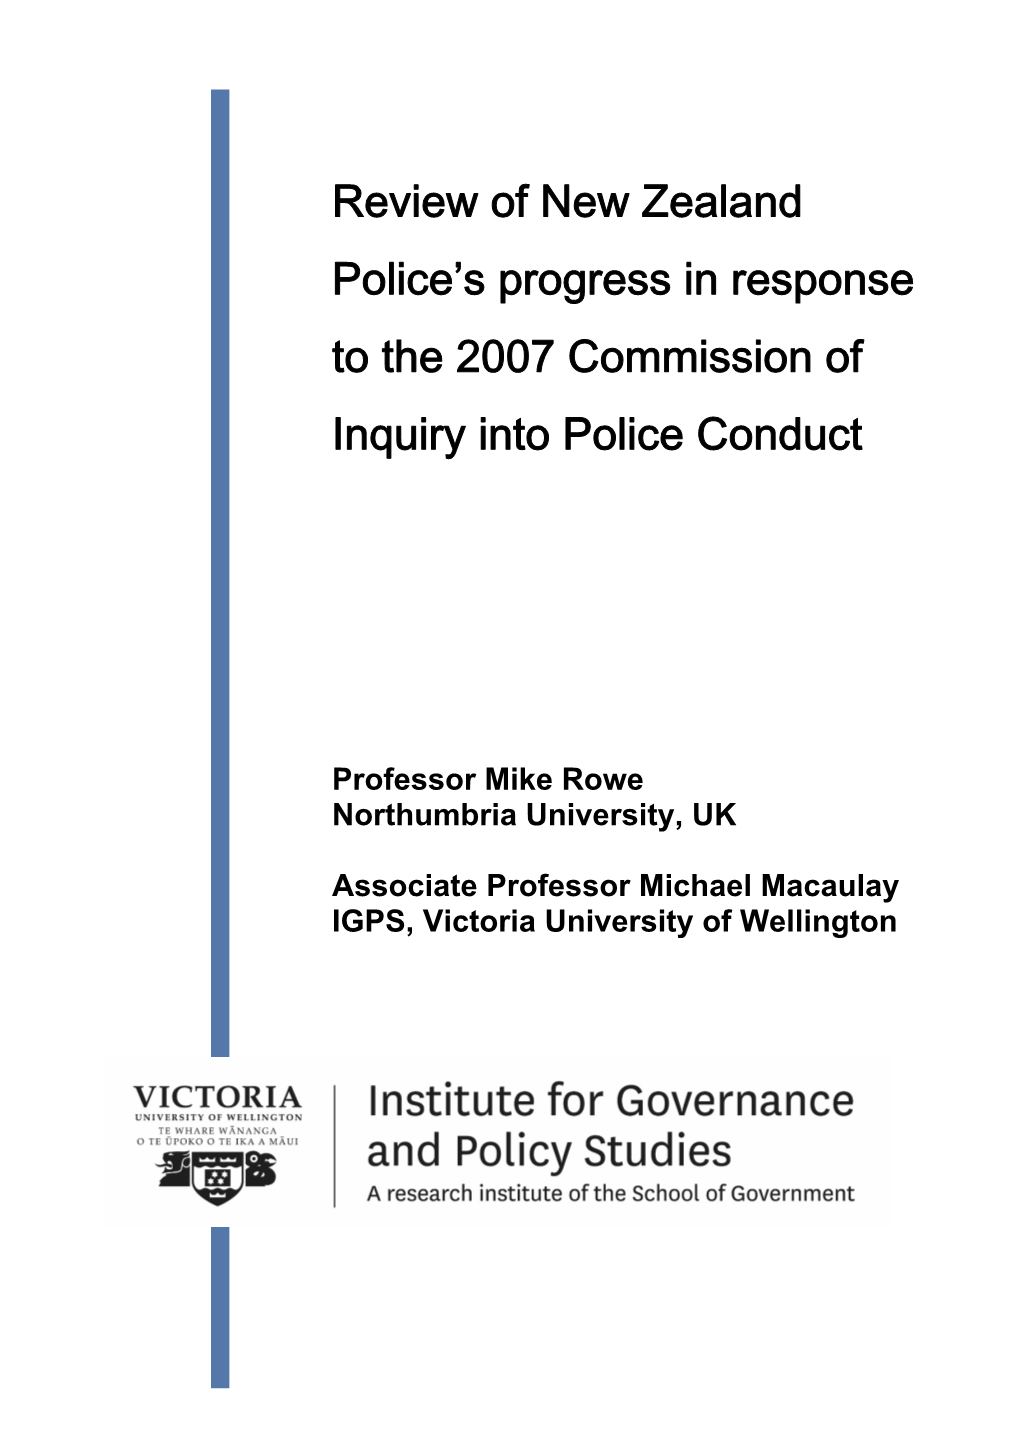 Review of New Zealand Police's Progress in Response to the 2007